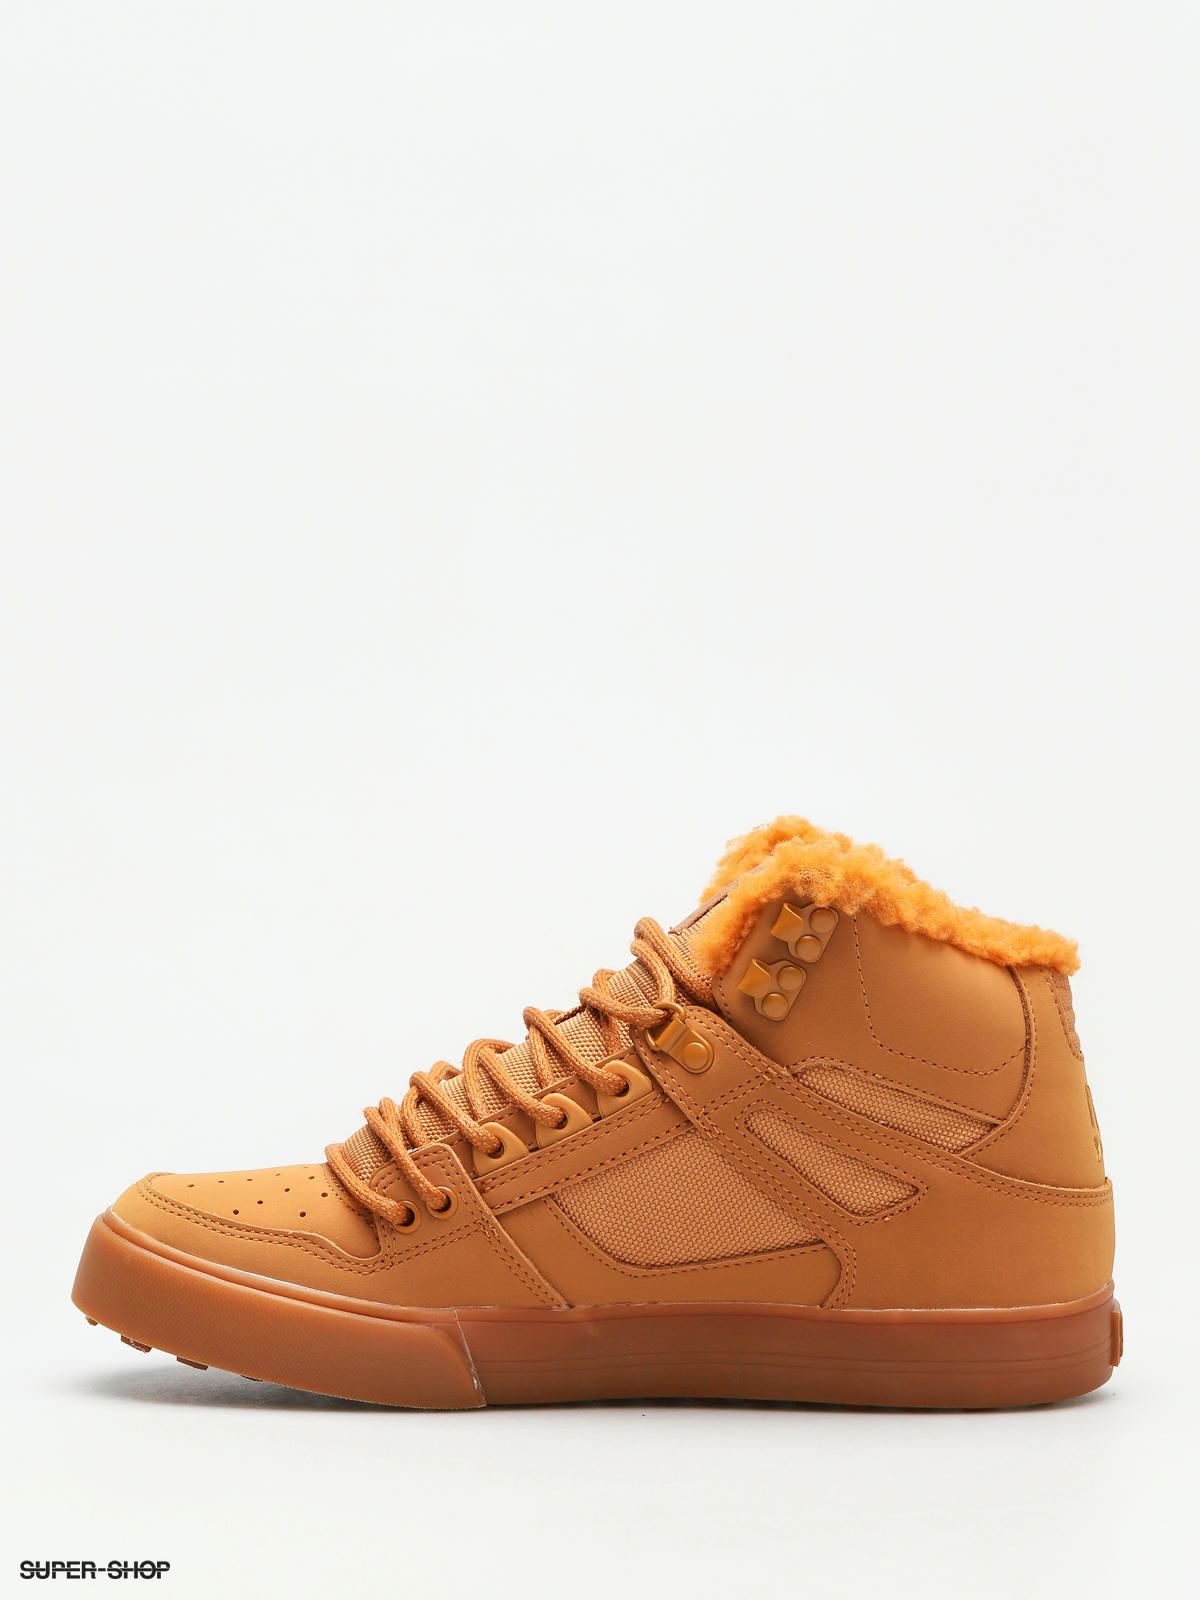 WEW DC Men's Shoes ''Pure High-Top WC WNT" Wheat/White 